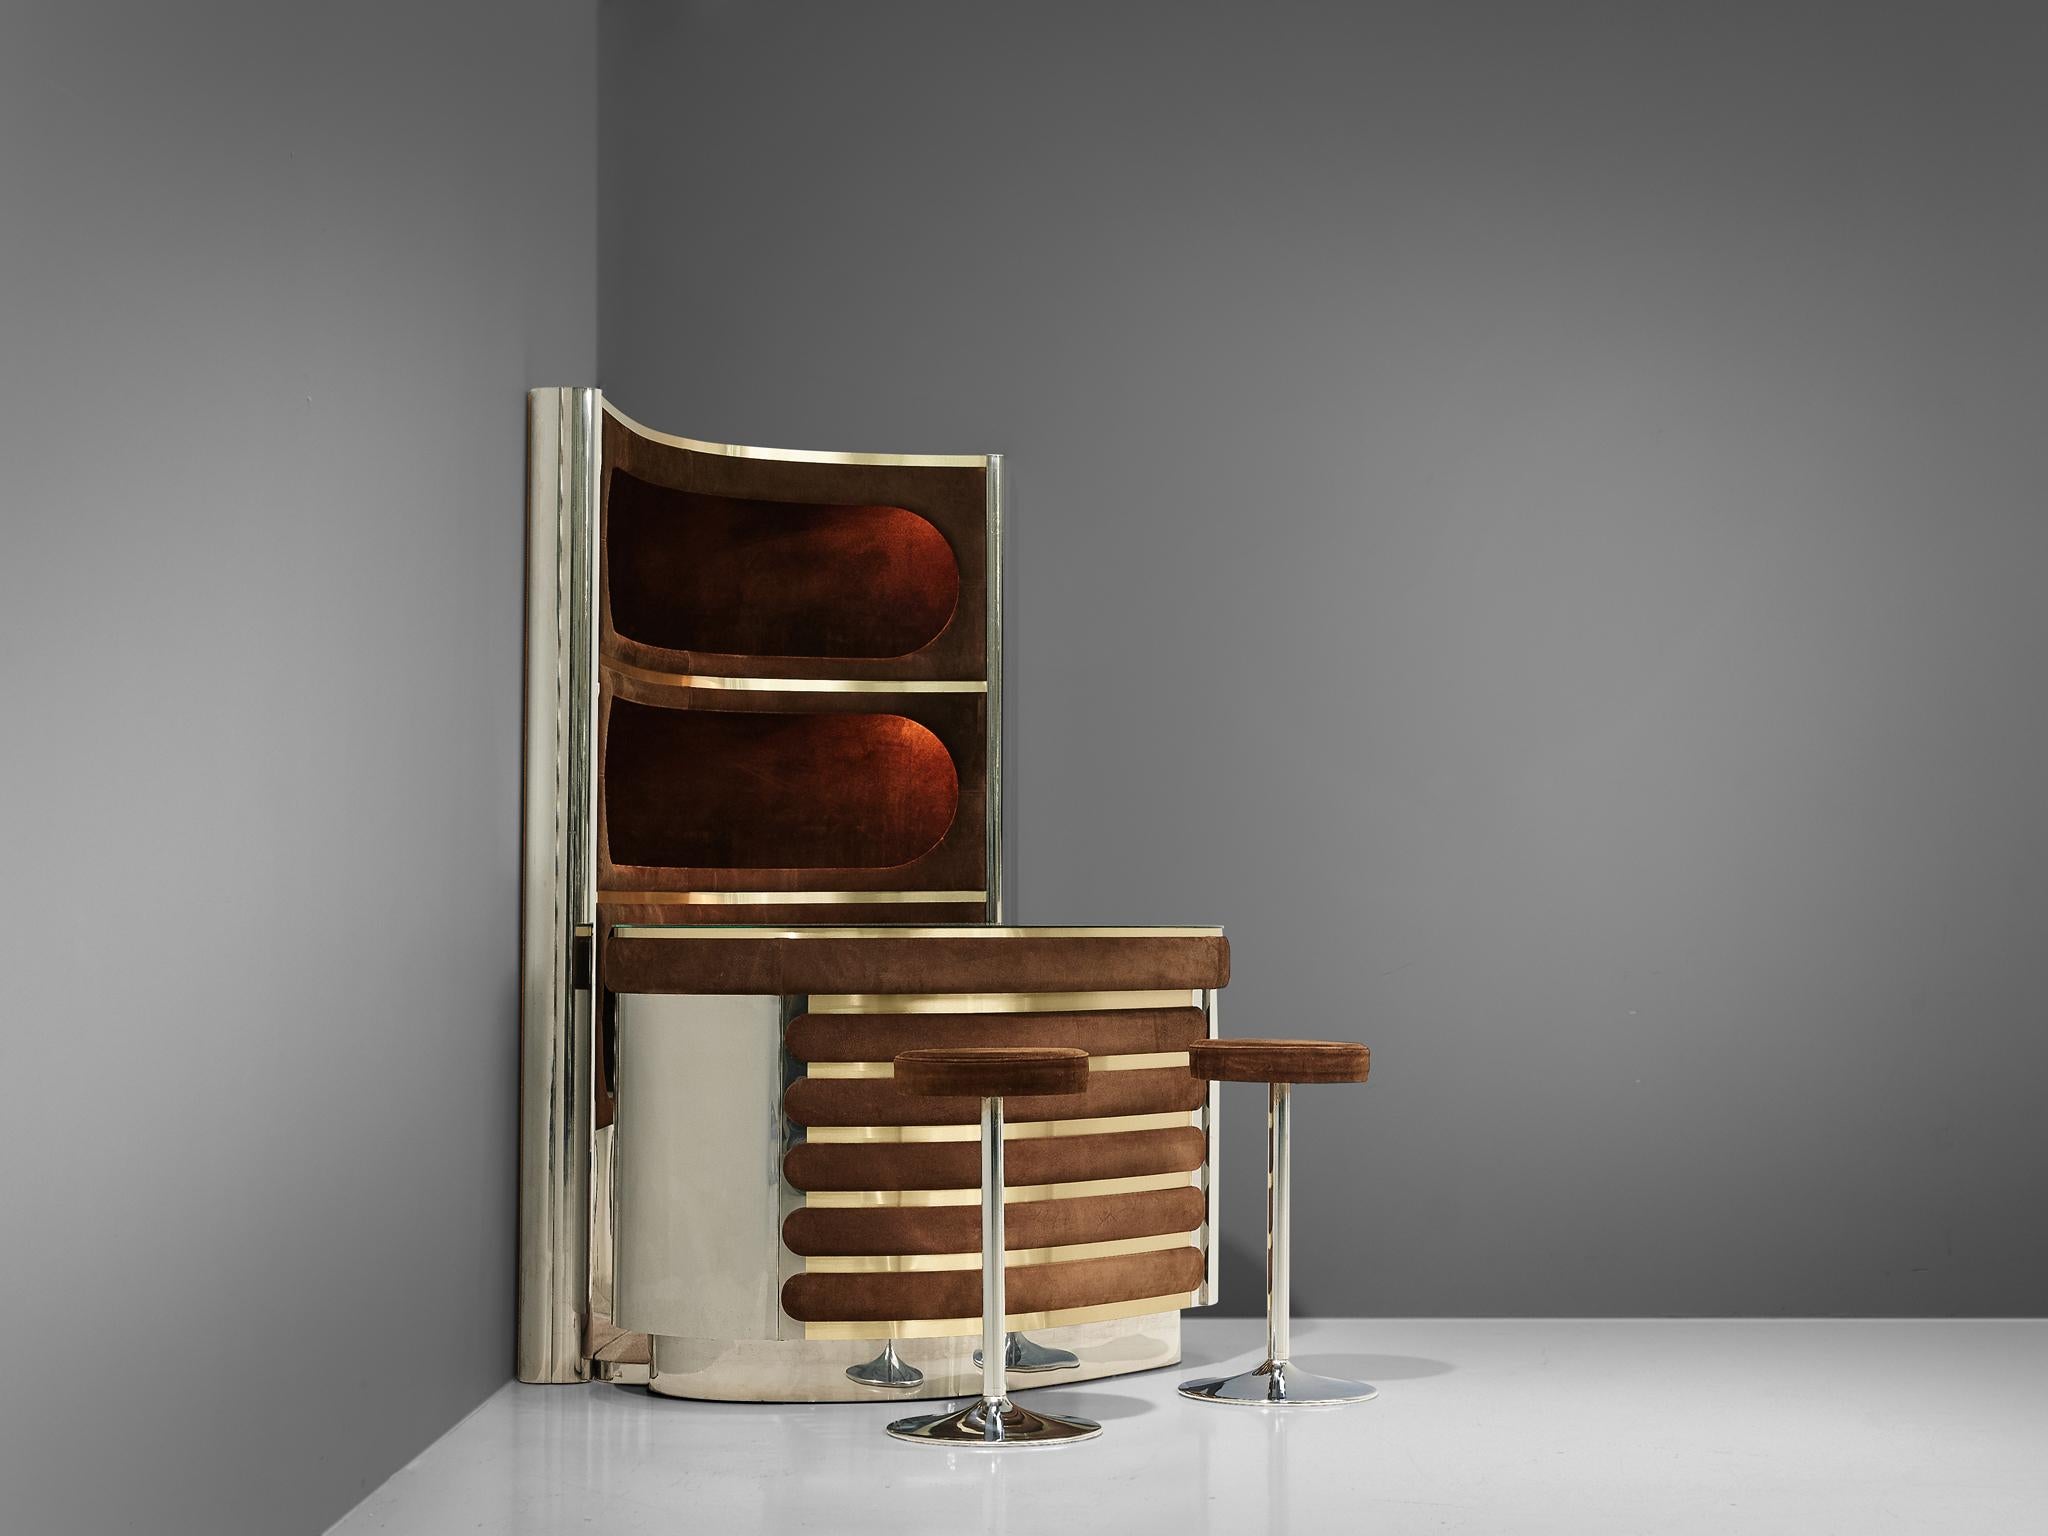 Willy Rizzo, cocktail bar, chromed metal, suede, glass and brass, Italy, 1970s

Hollywood Regency cocktail bar, designed by Willy Rizzo in the 1970s. His bar cabinet designs are among his most prolific pieces of furniture. The set includes a